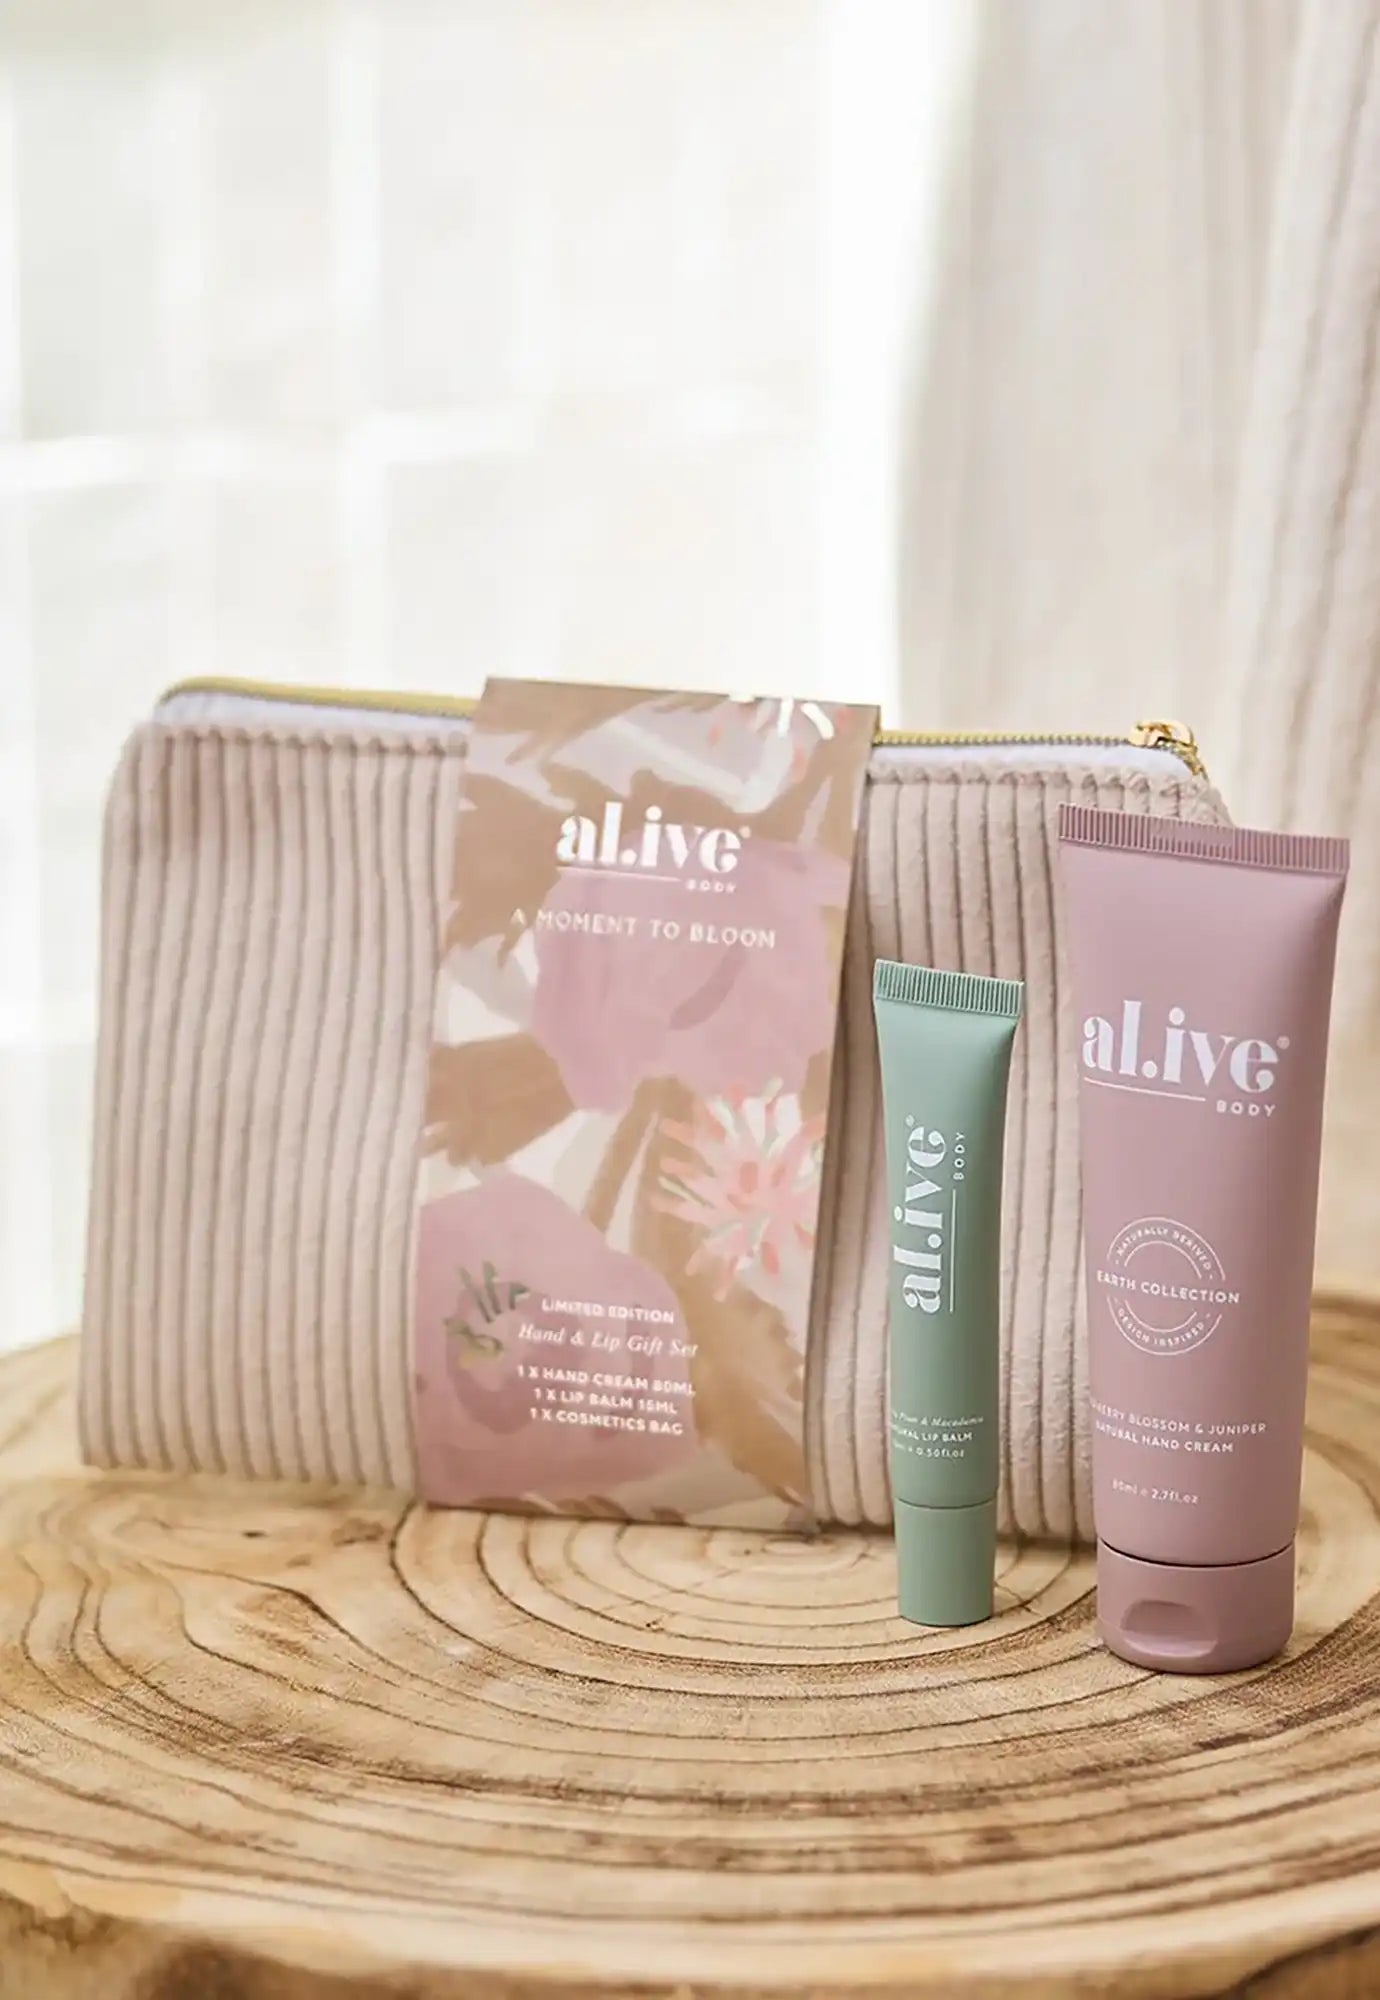 al.ive - hand & lip gift set - a moment to bloom